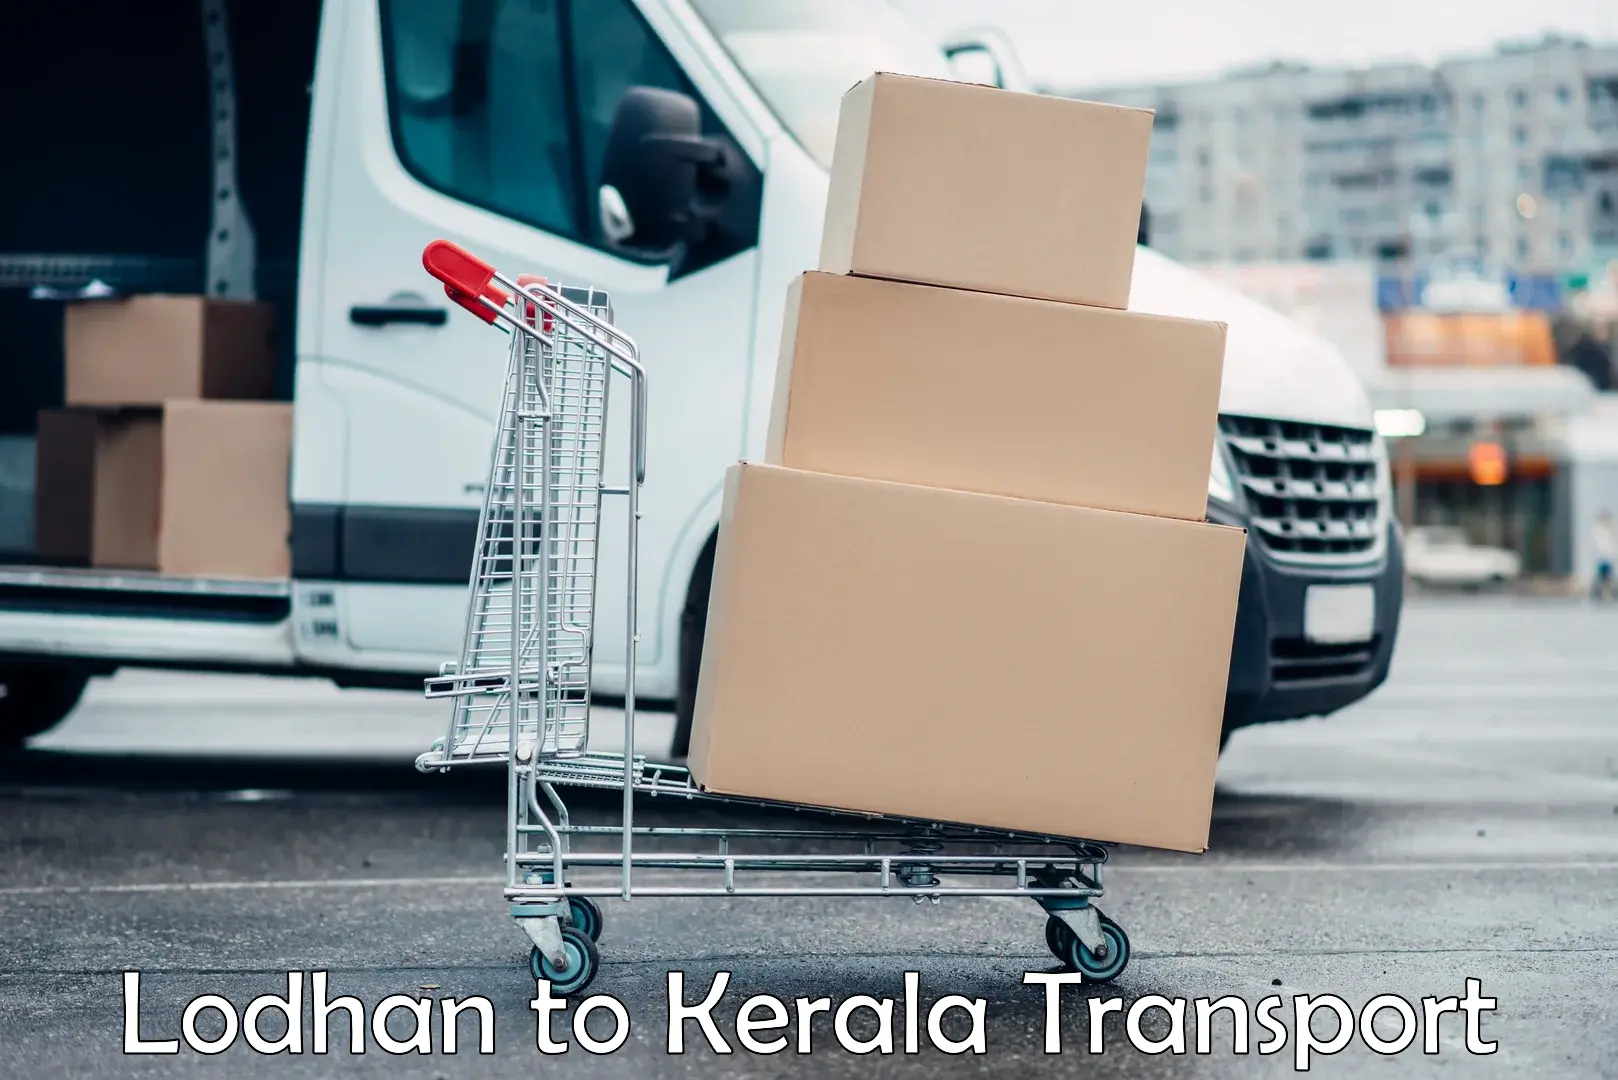 Transport in sharing in Lodhan to Ranni